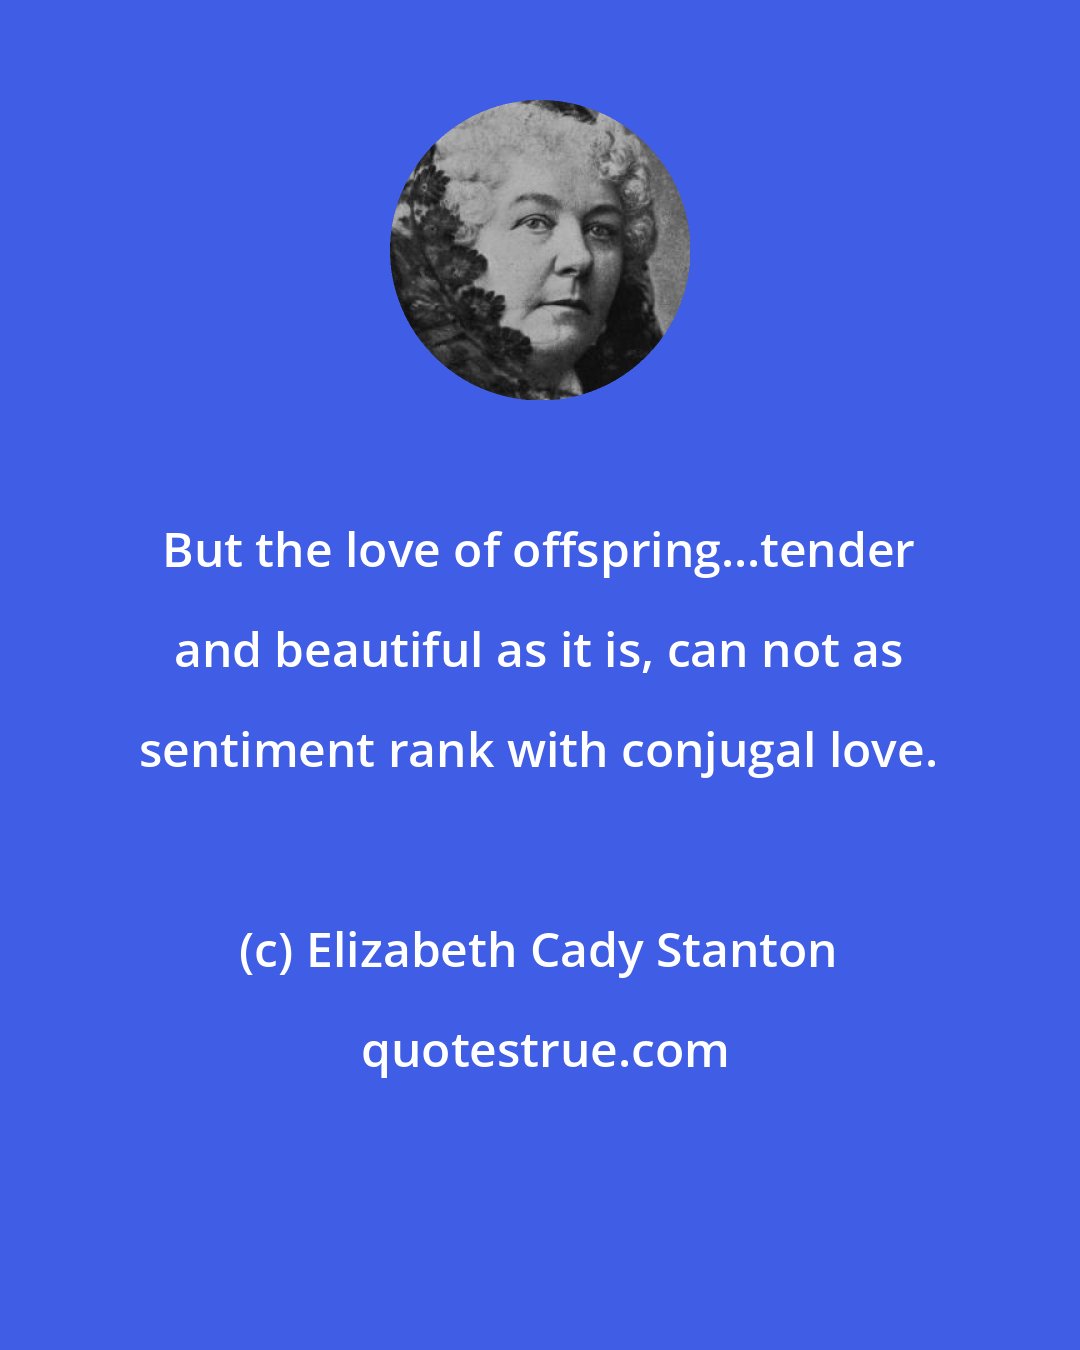 Elizabeth Cady Stanton: But the love of offspring...tender and beautiful as it is, can not as sentiment rank with conjugal love.